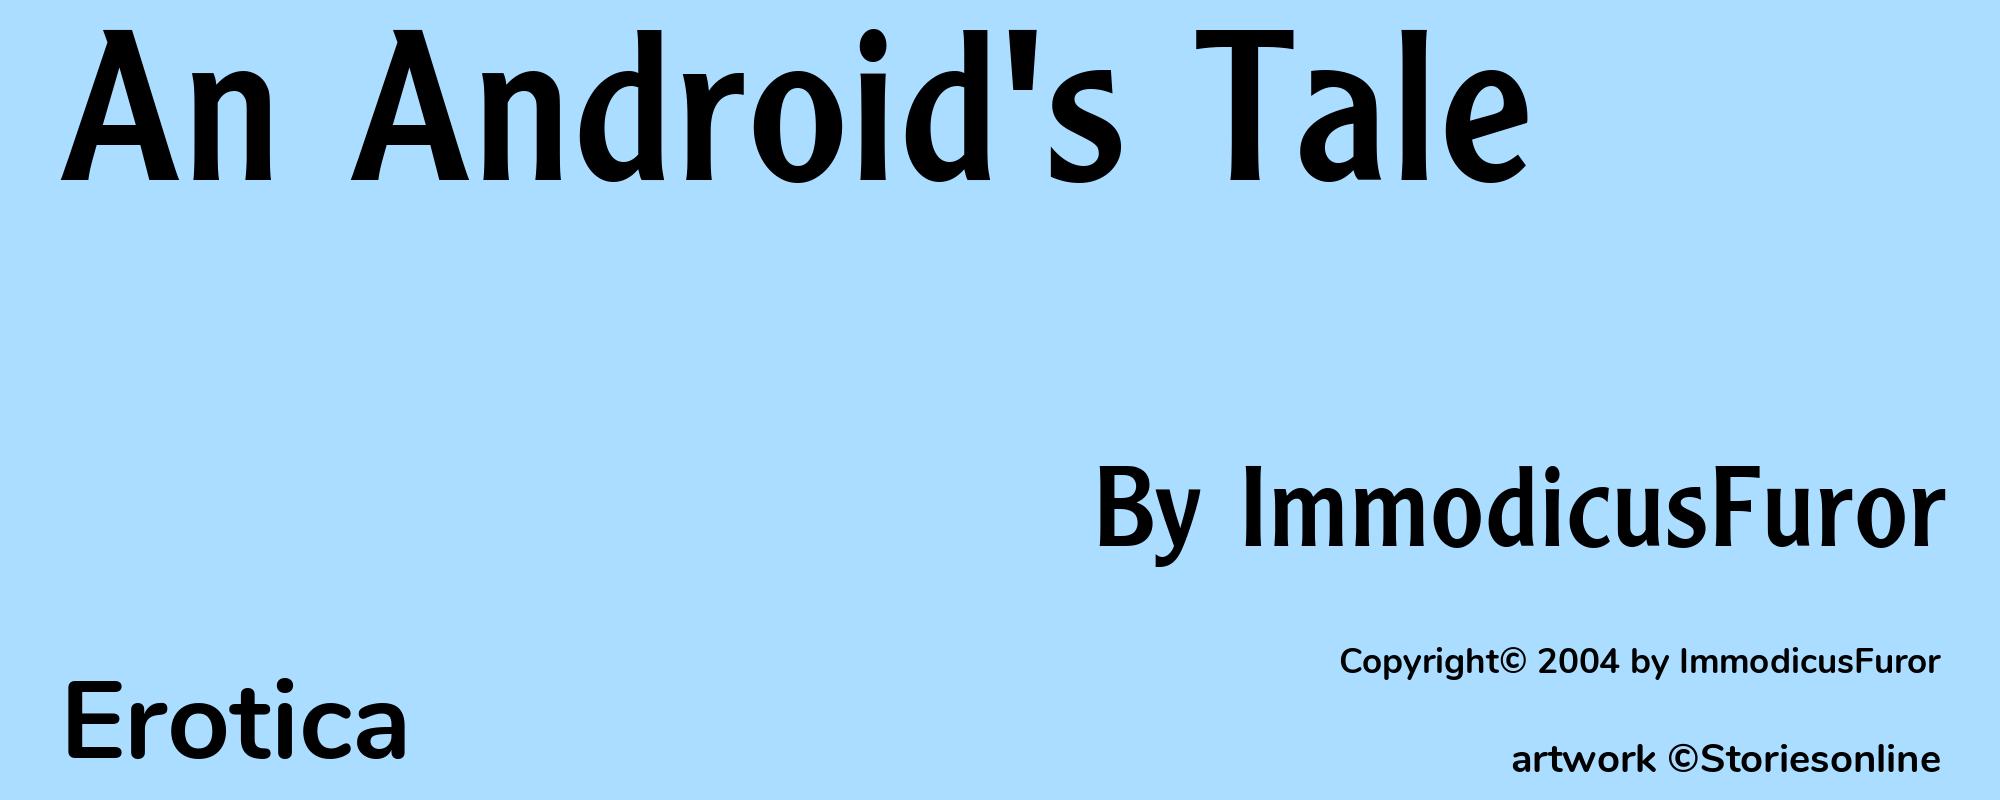 An Android's Tale - Cover